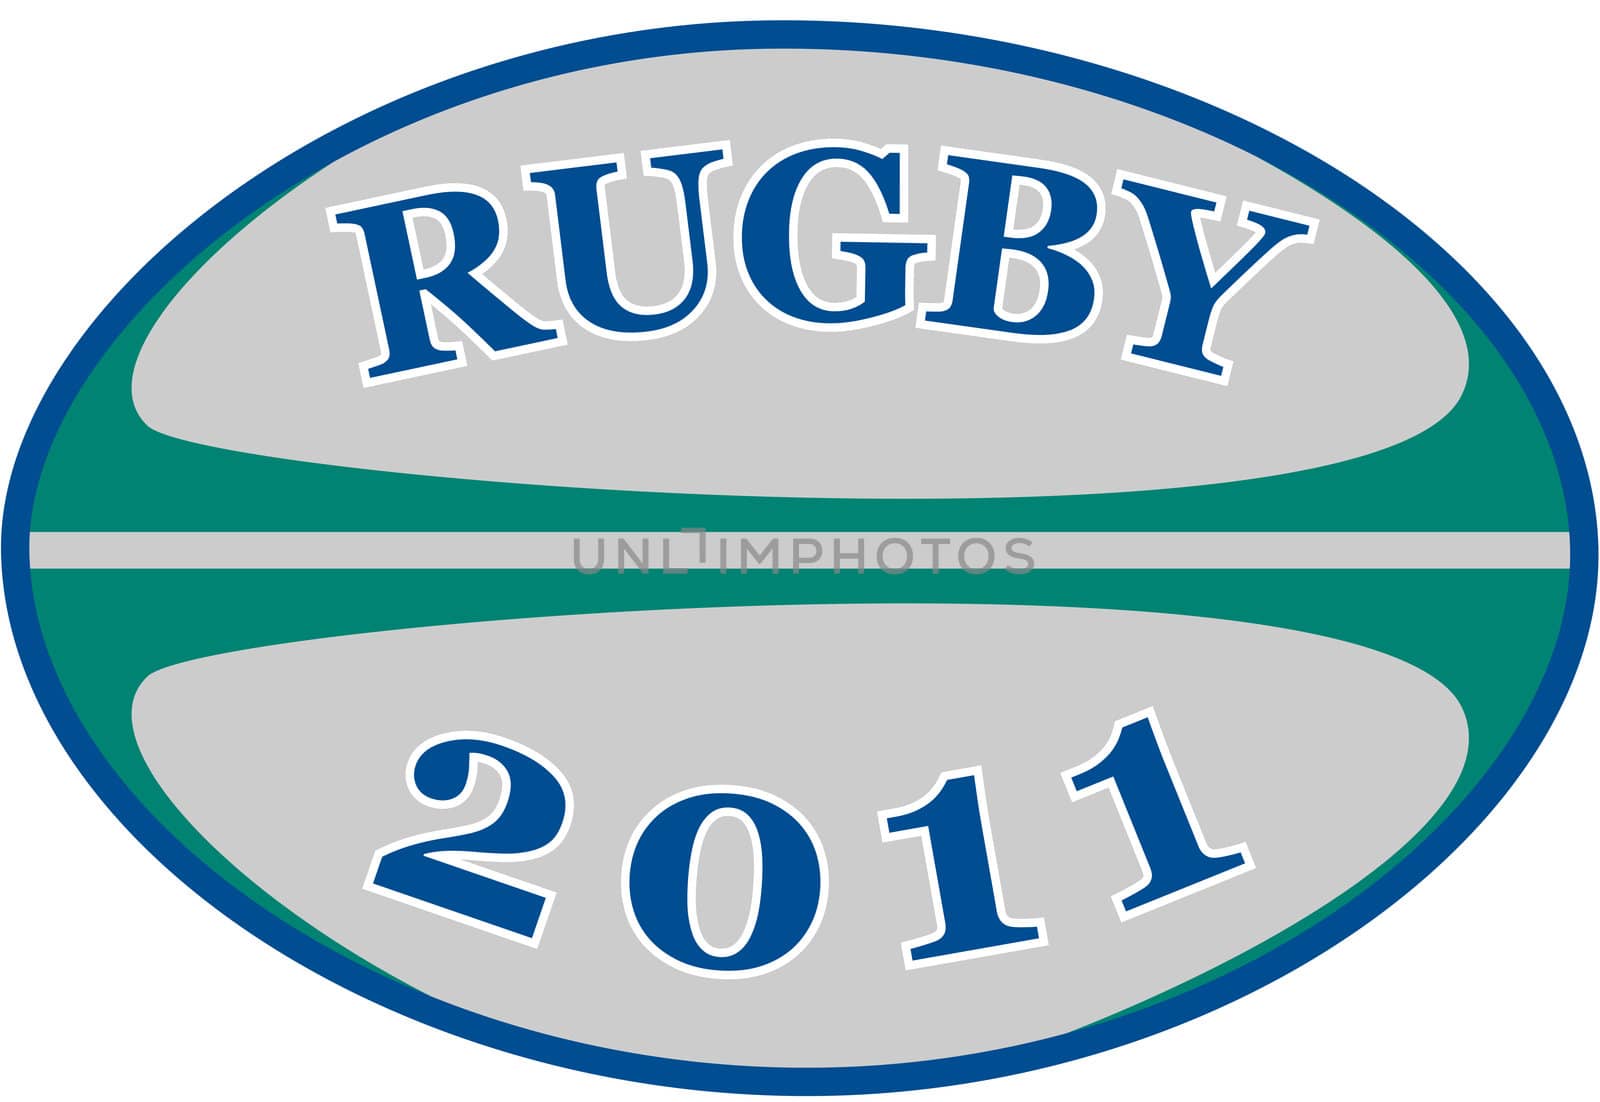 illustration of a rugby ball with words "Rugby 2011 "